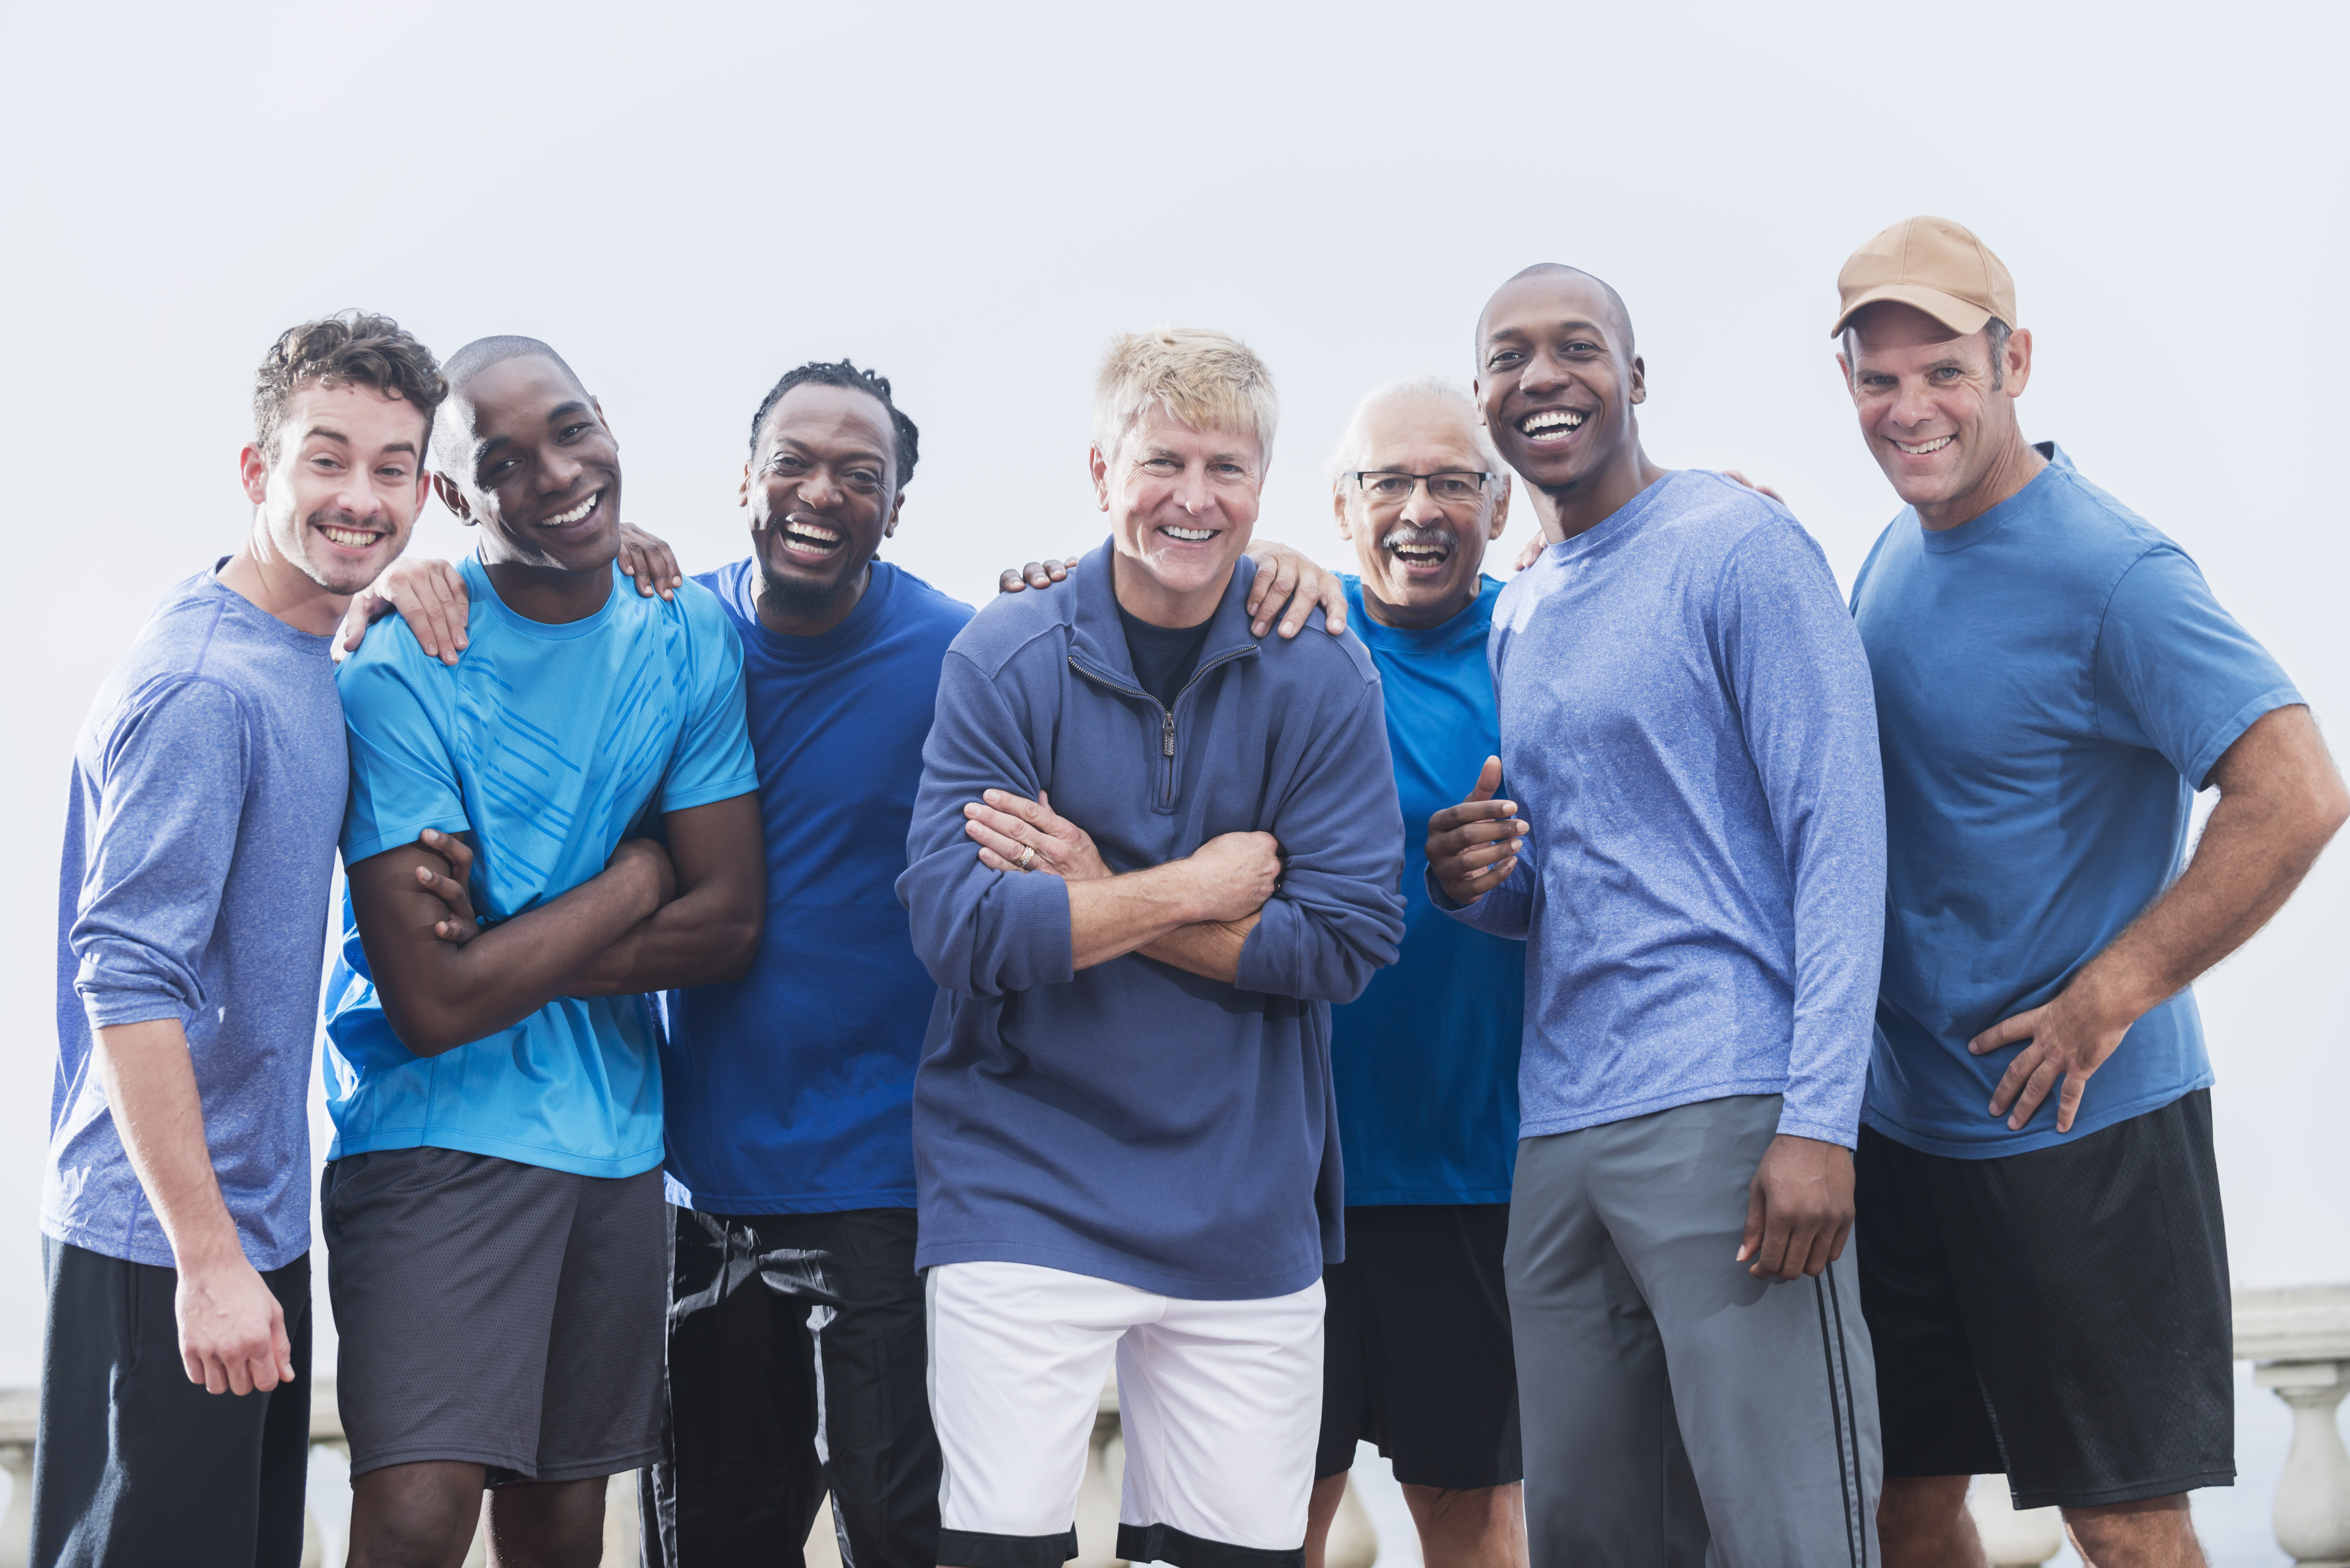 group of diverse men in blue shirts smiling in a group together